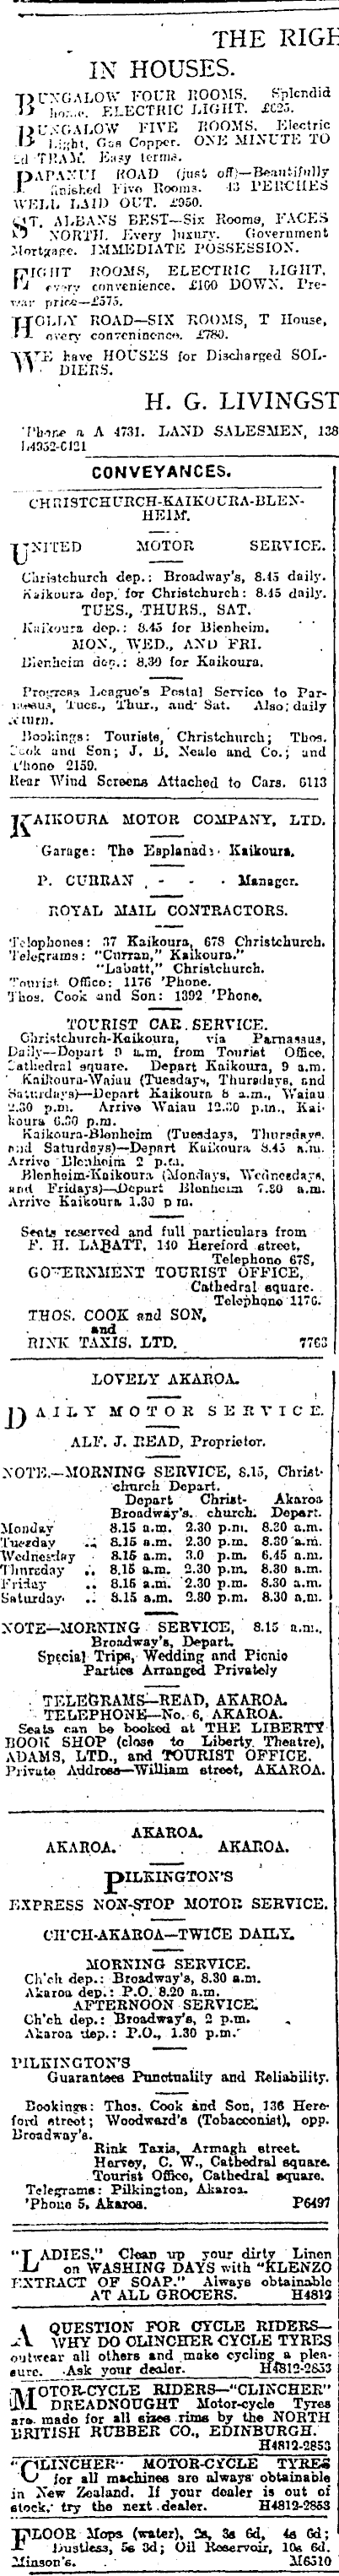 Papers Past Newspapers Press 30 July 1919 Page 10 Advertisements Column 1